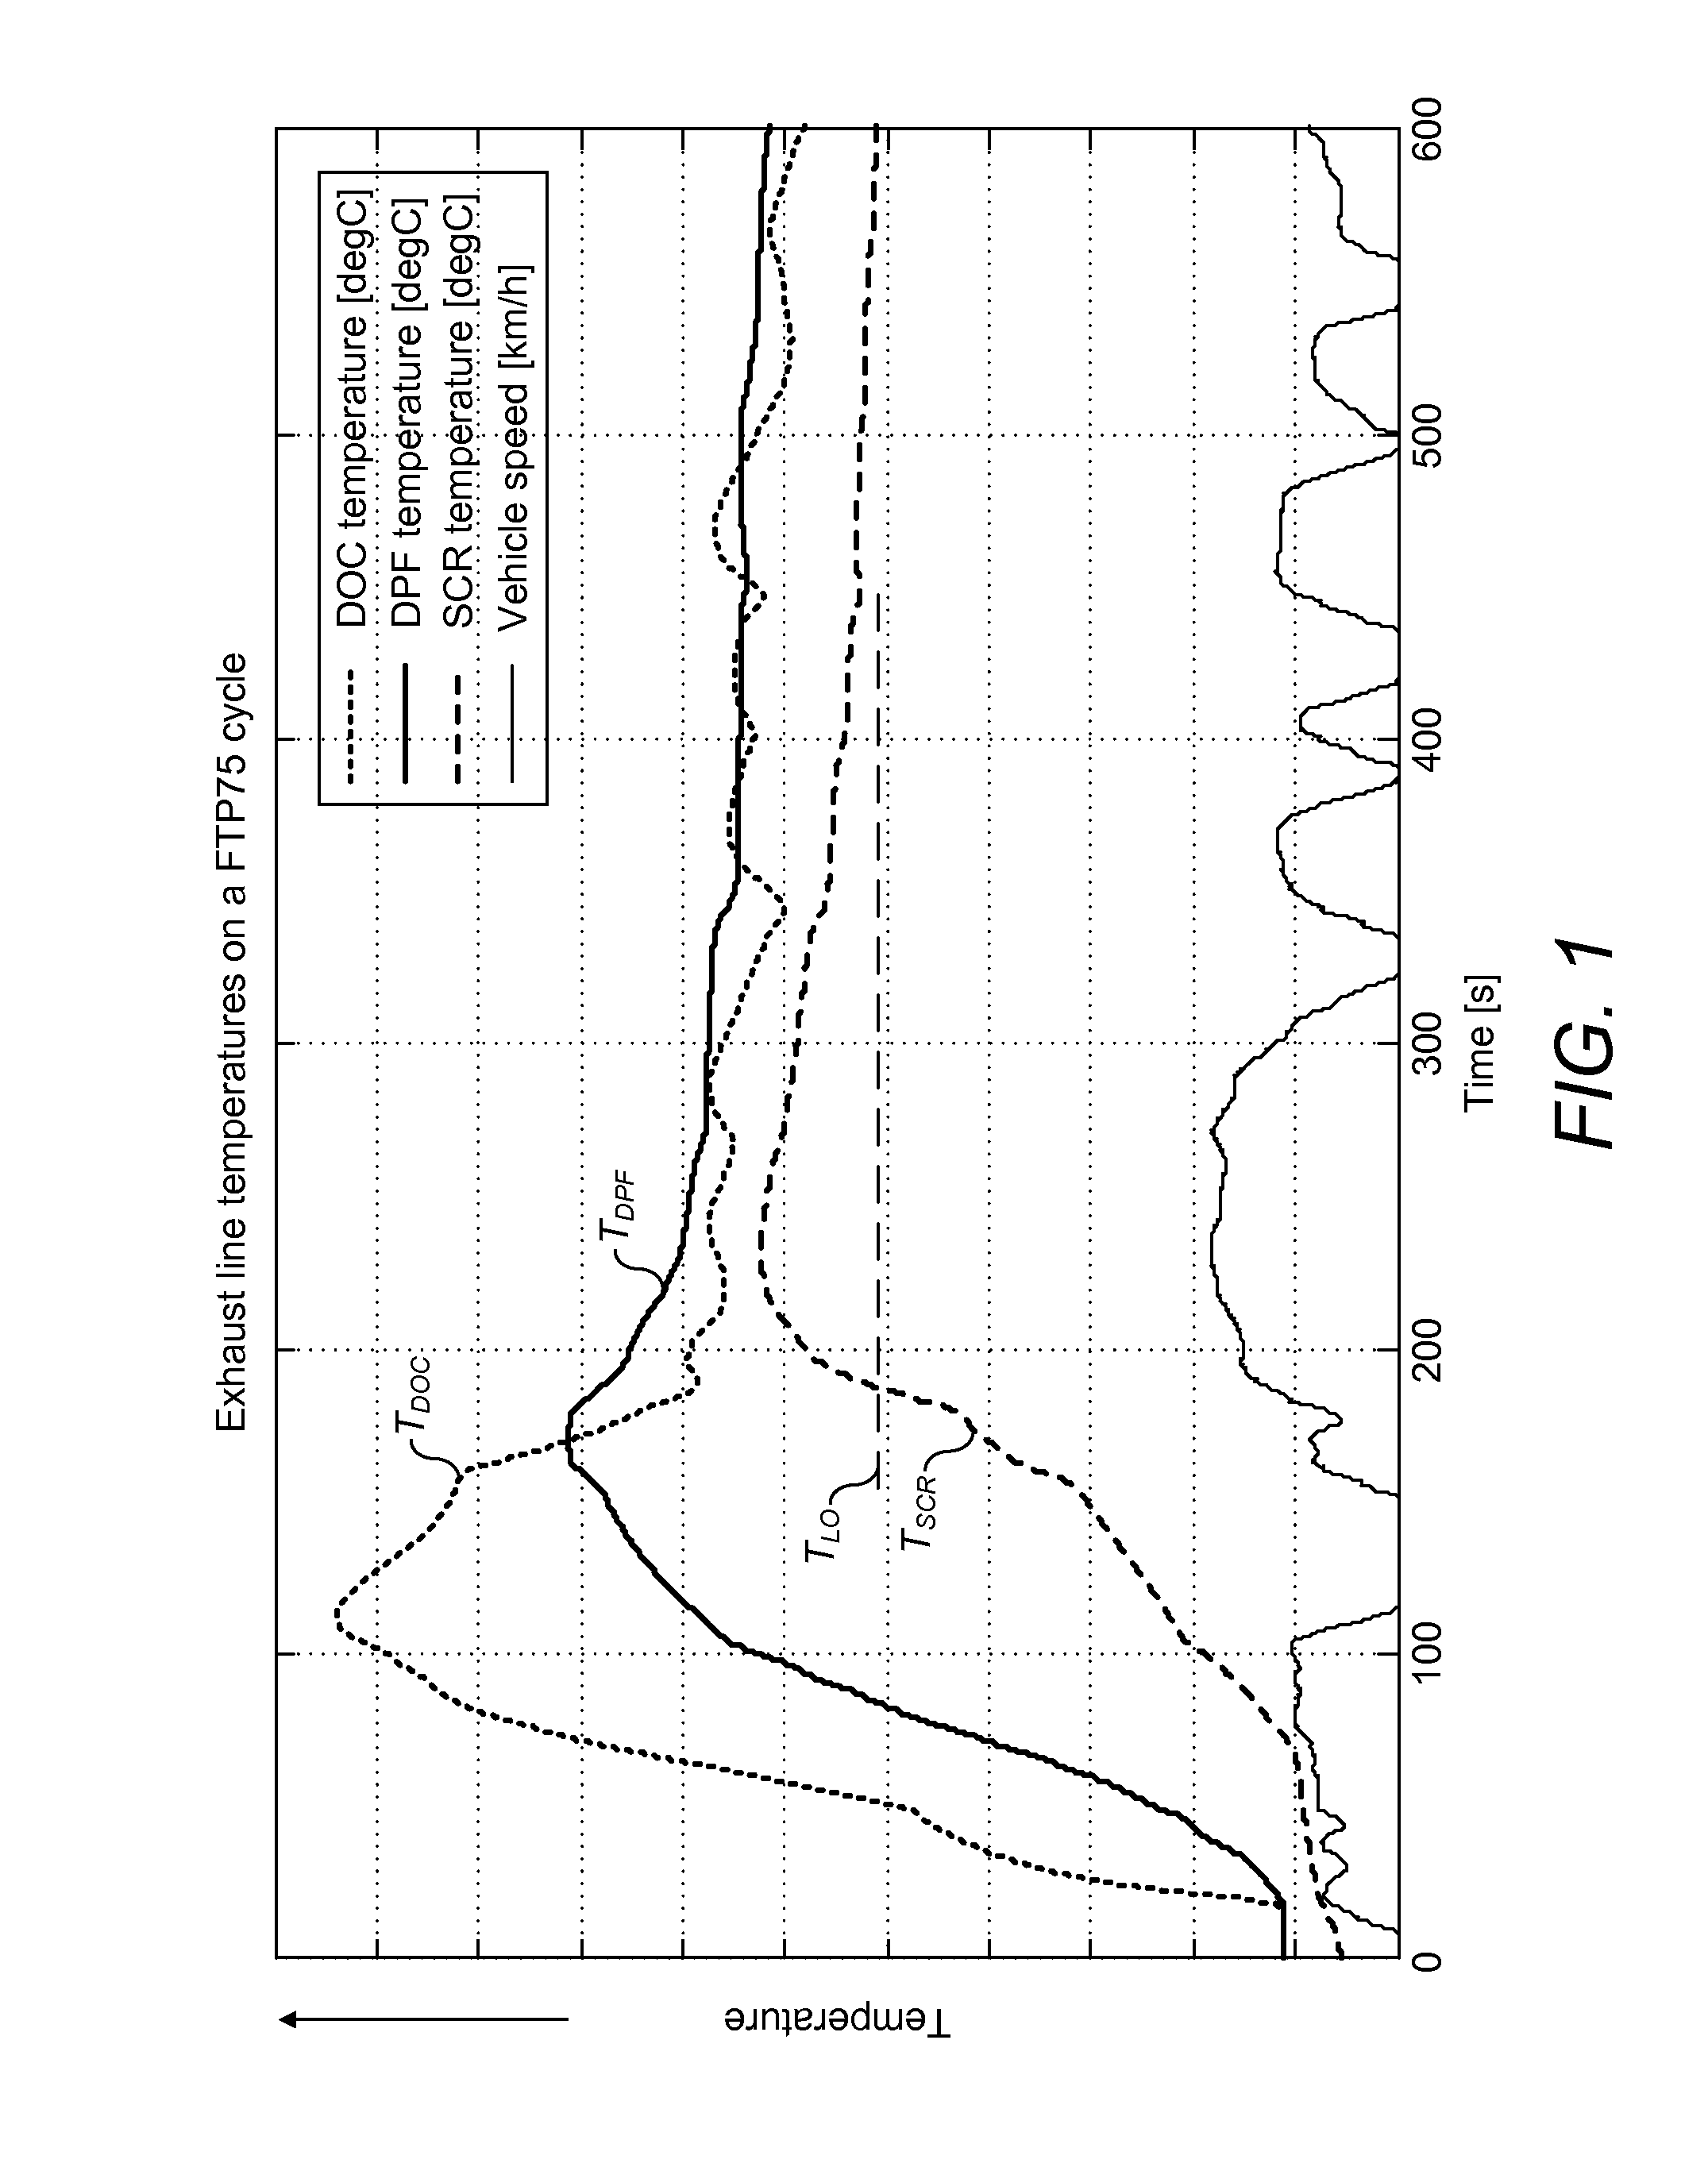 Internal combustion engine with exhaust aftertreatment and its method of operation